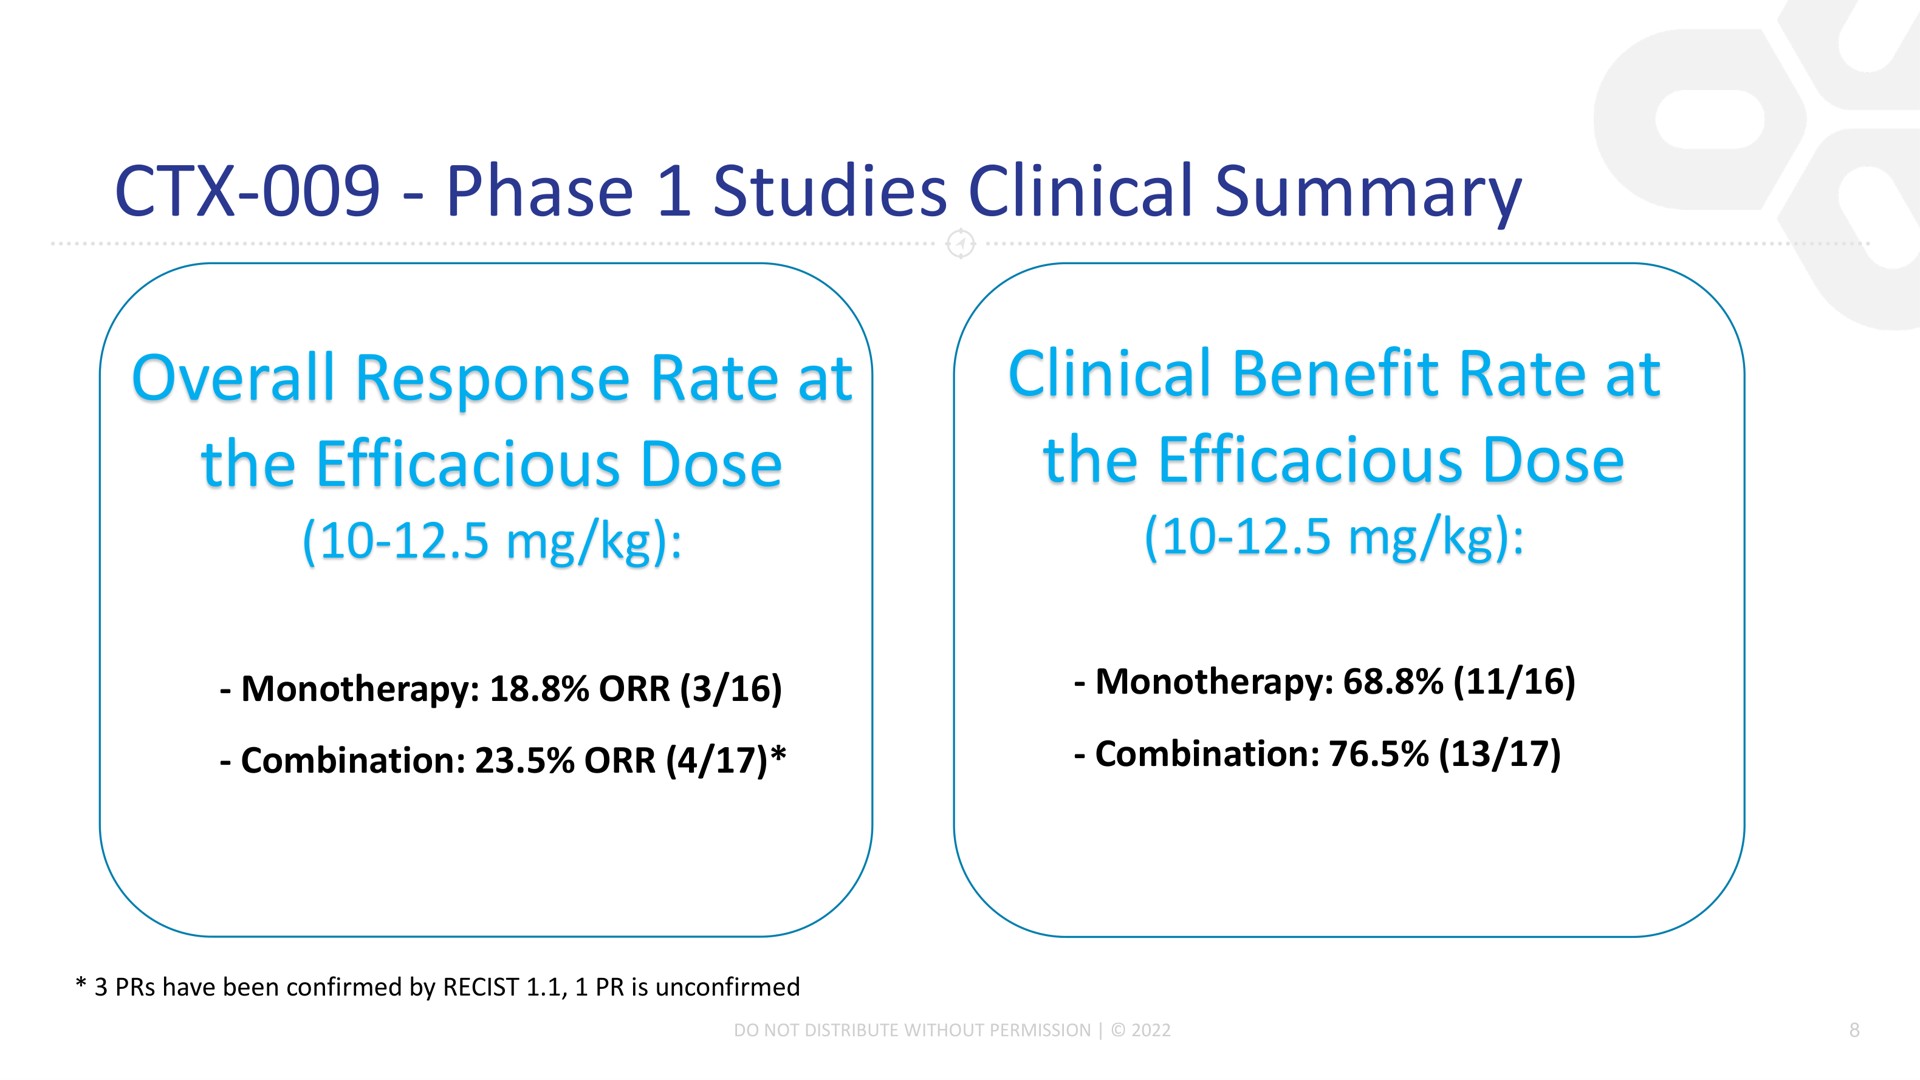 phase studies clinical summary overall response rate at the efficacious dose clinical benefit rate at the efficacious dose | Compass Therapeutics